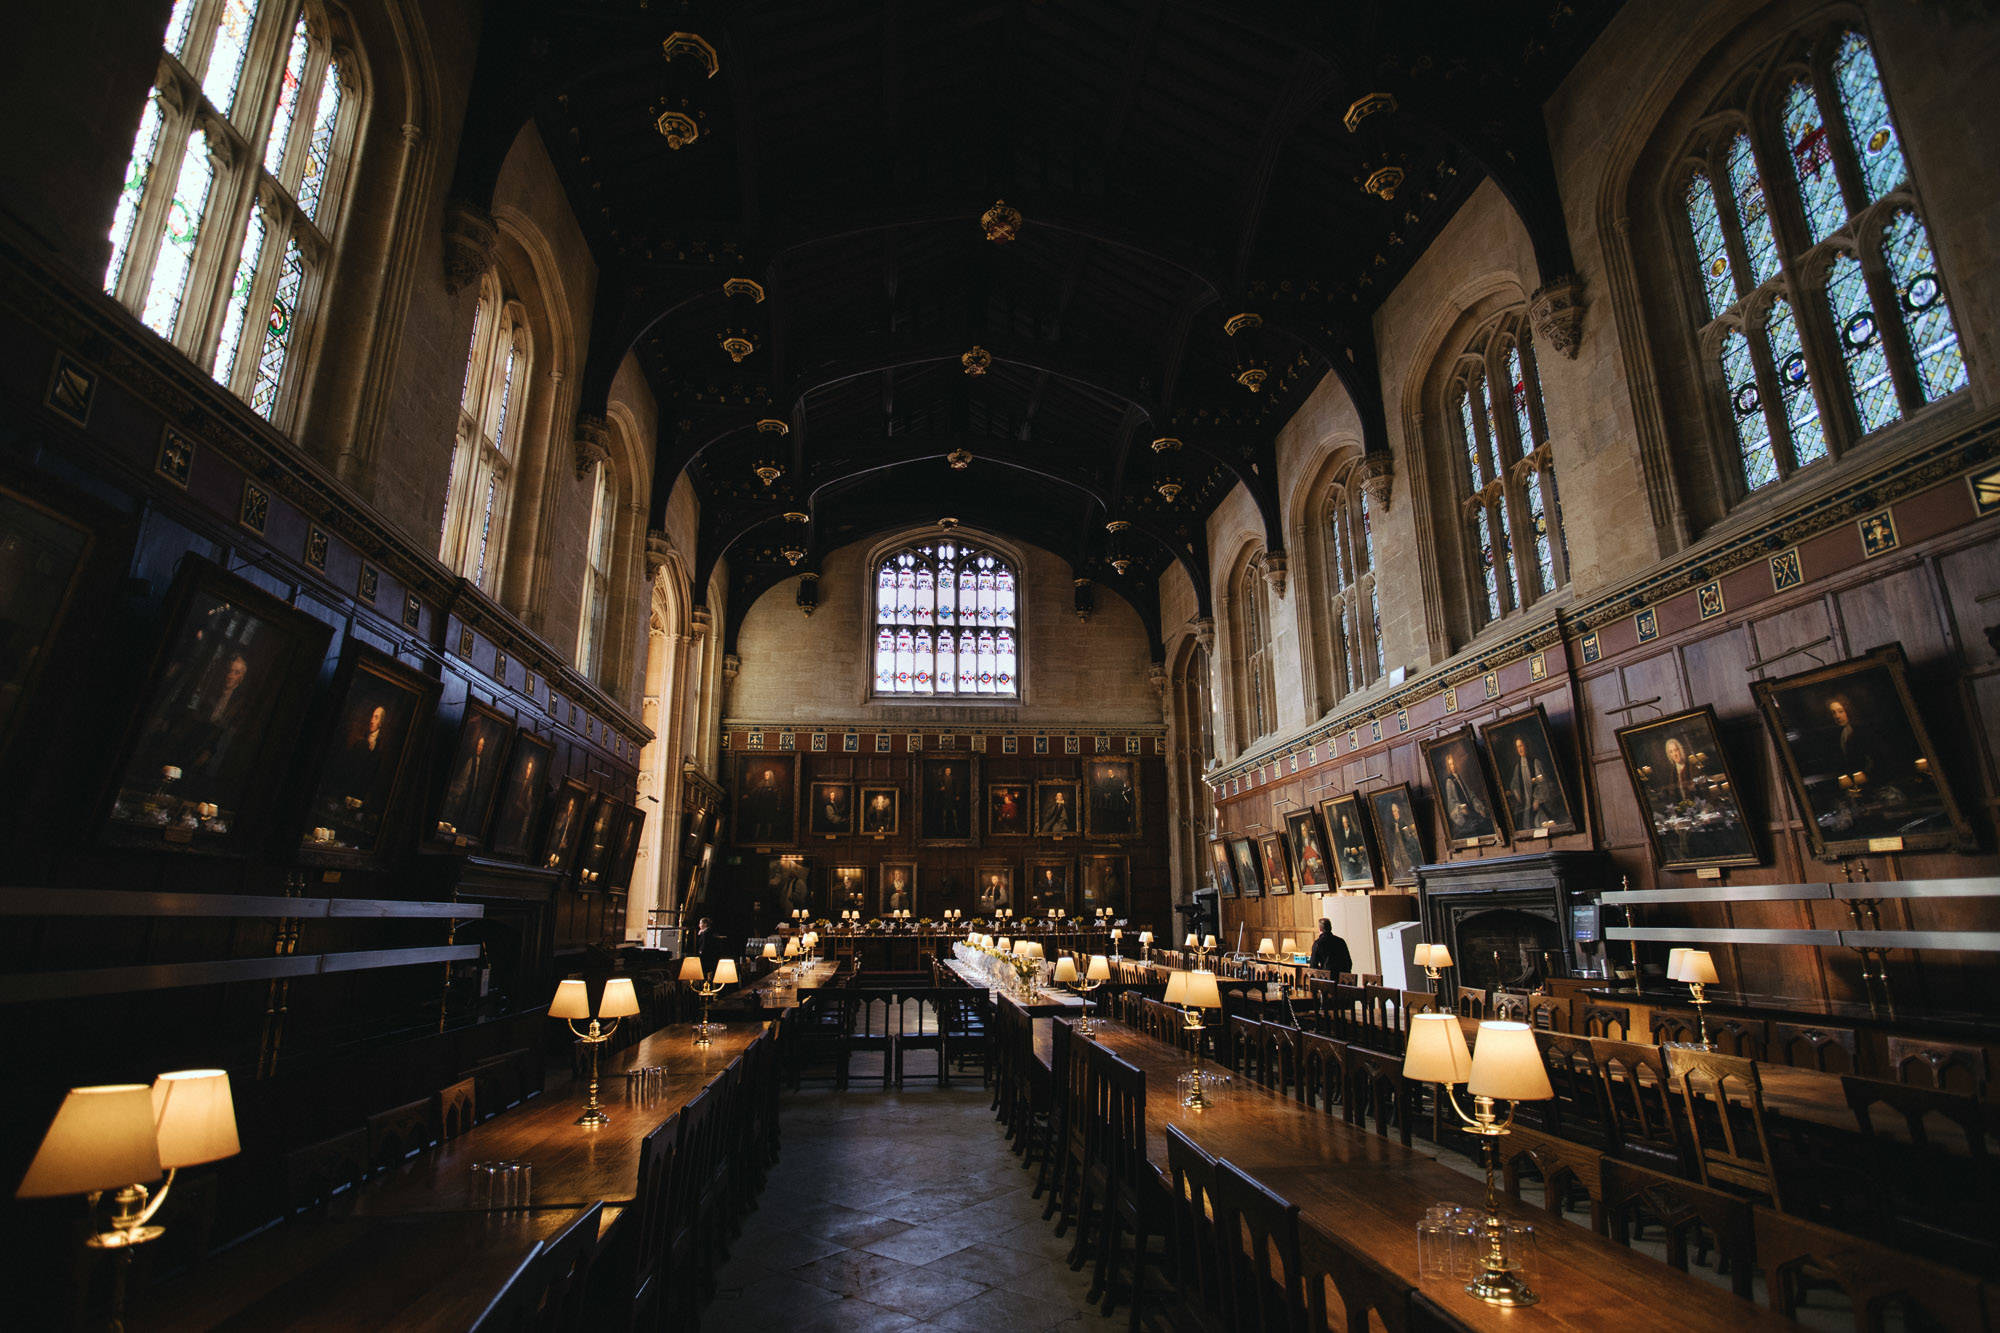 oxford harry potter filming location